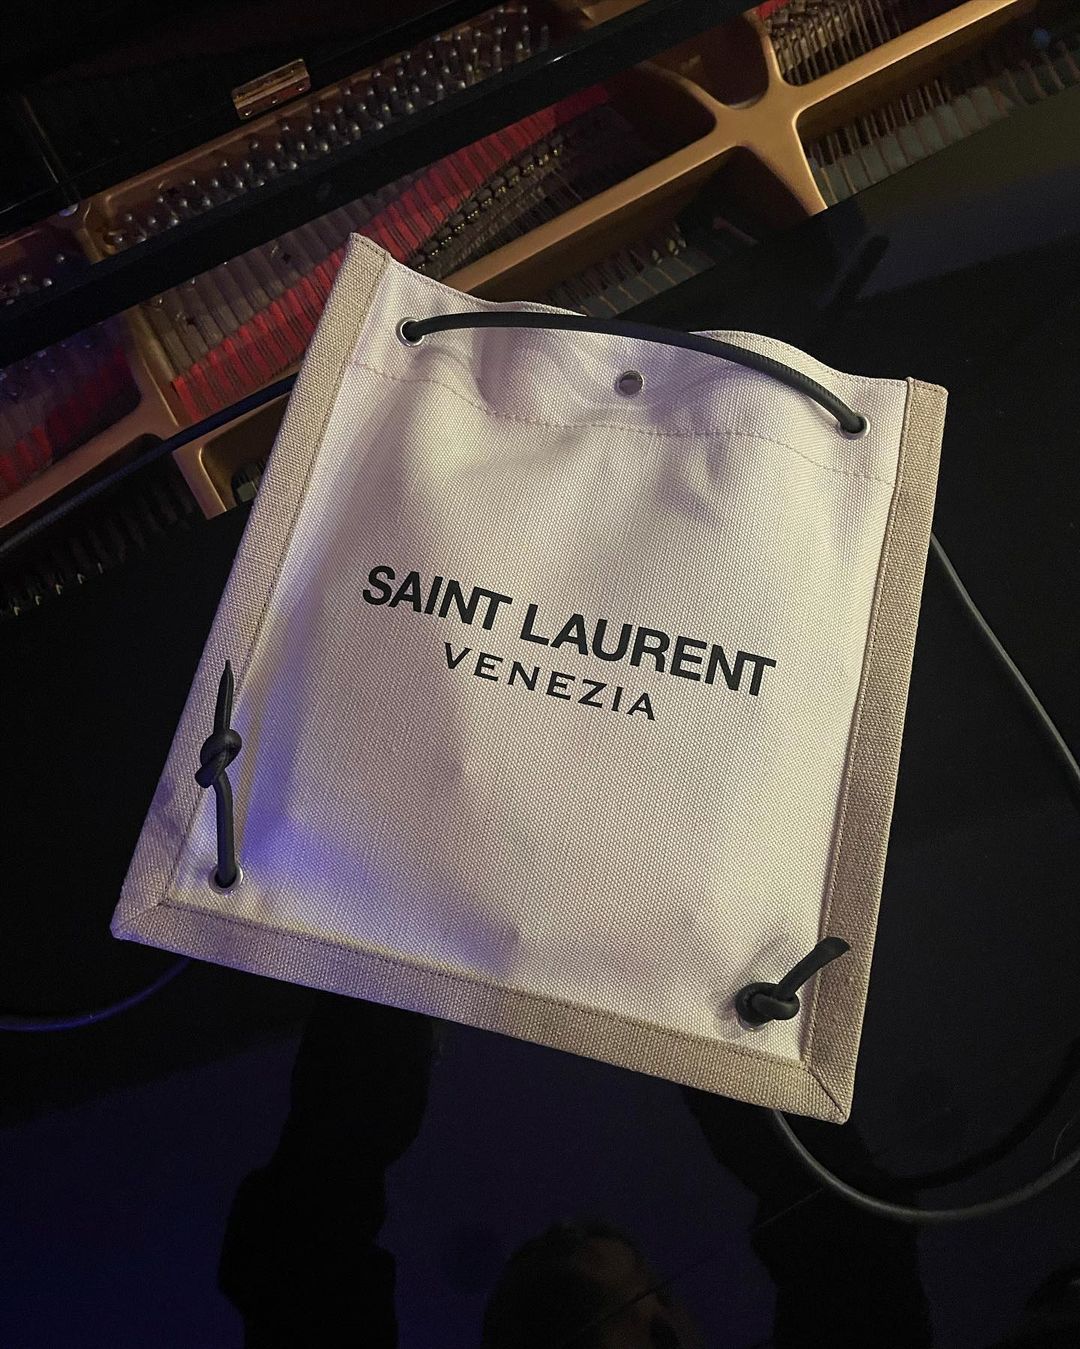 Saint Laurent @ysl
Men’s Spring Summer 22 Show by @anthonyvaccarello
JULY 14th
8…